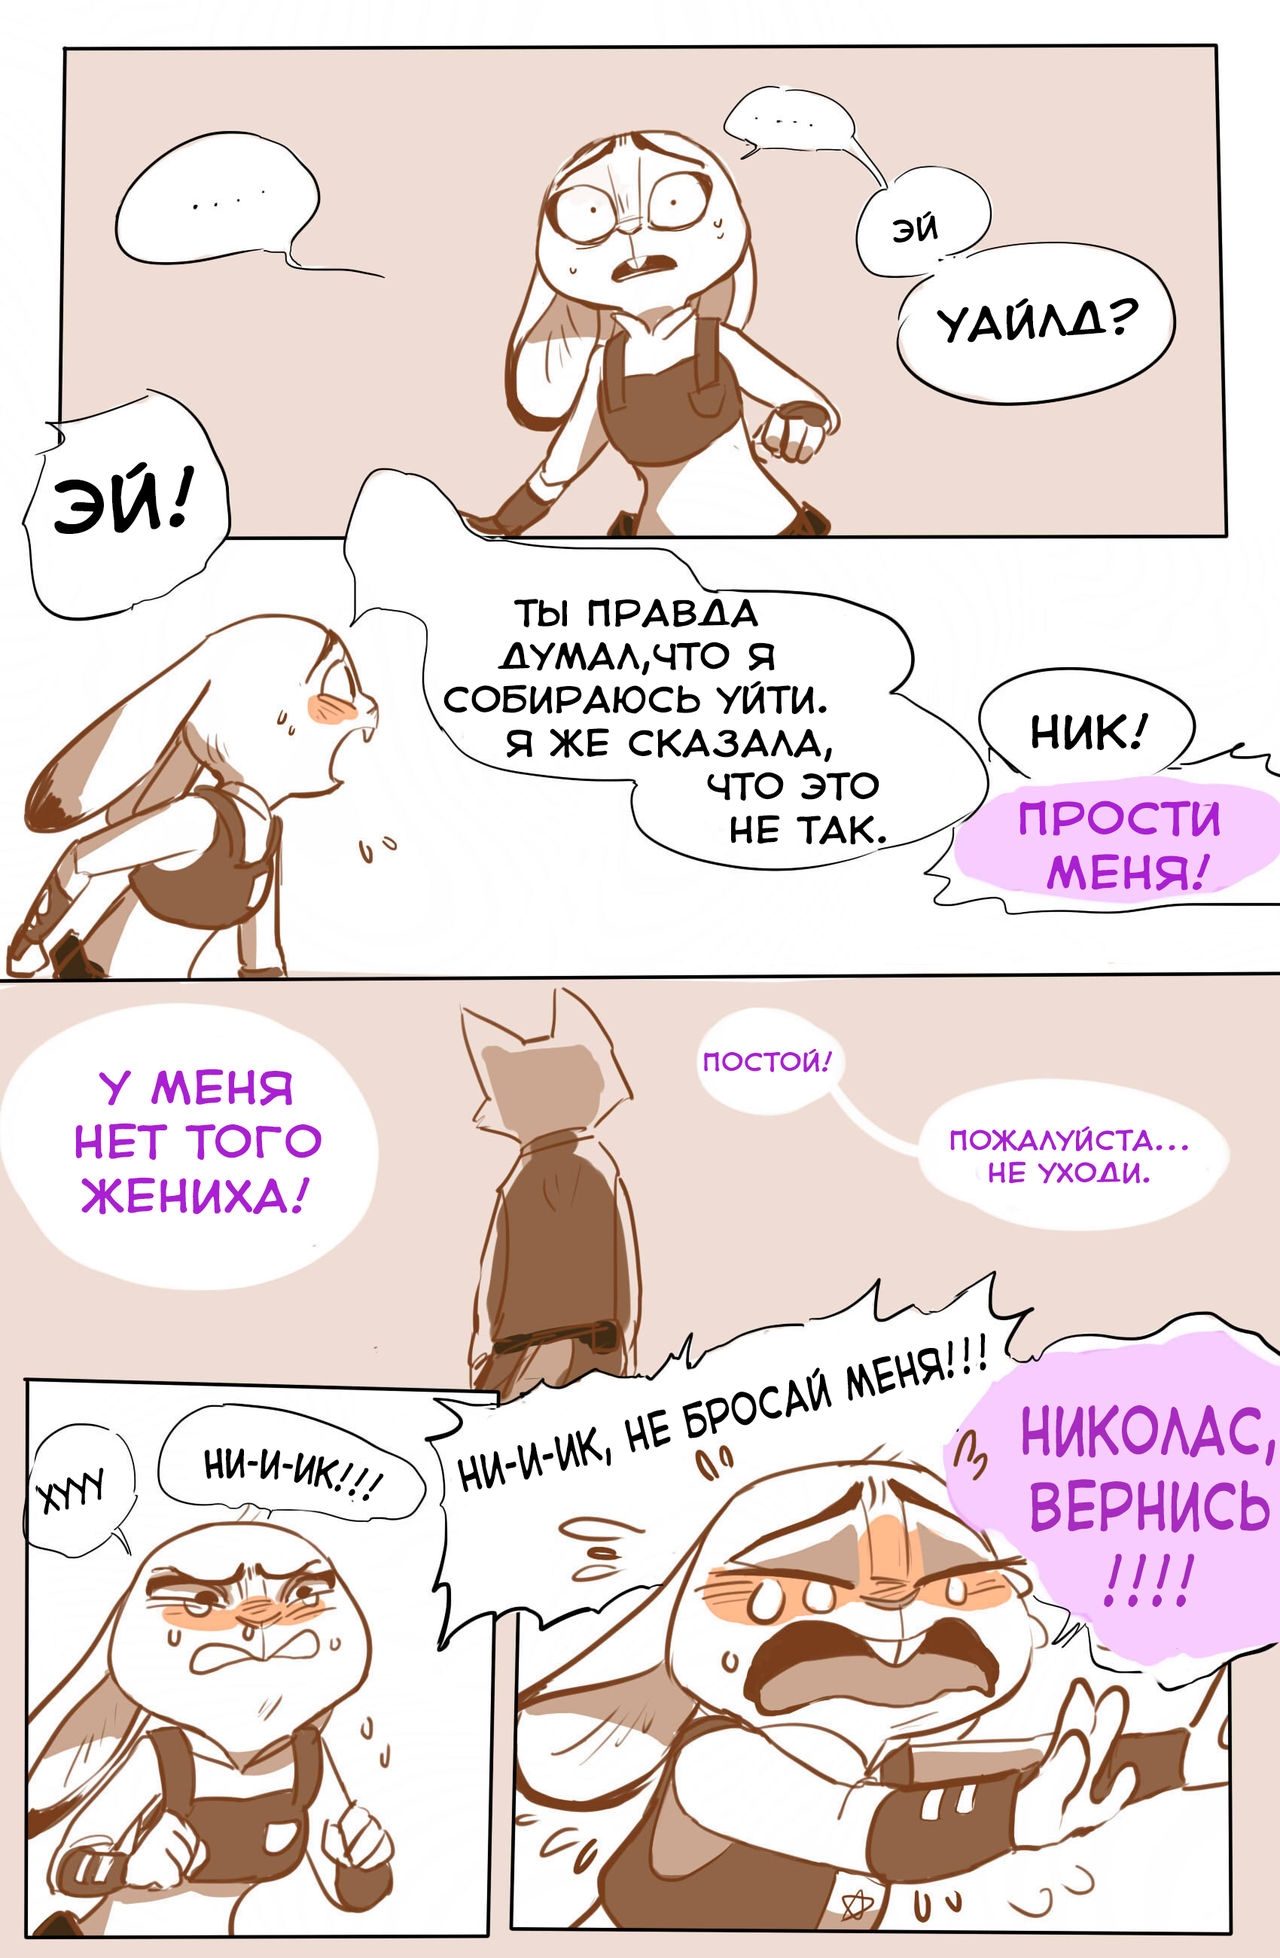 [lupinchopang27] Nick and Judy's the story (Zootopia) [Russian] [metalslayer] 13